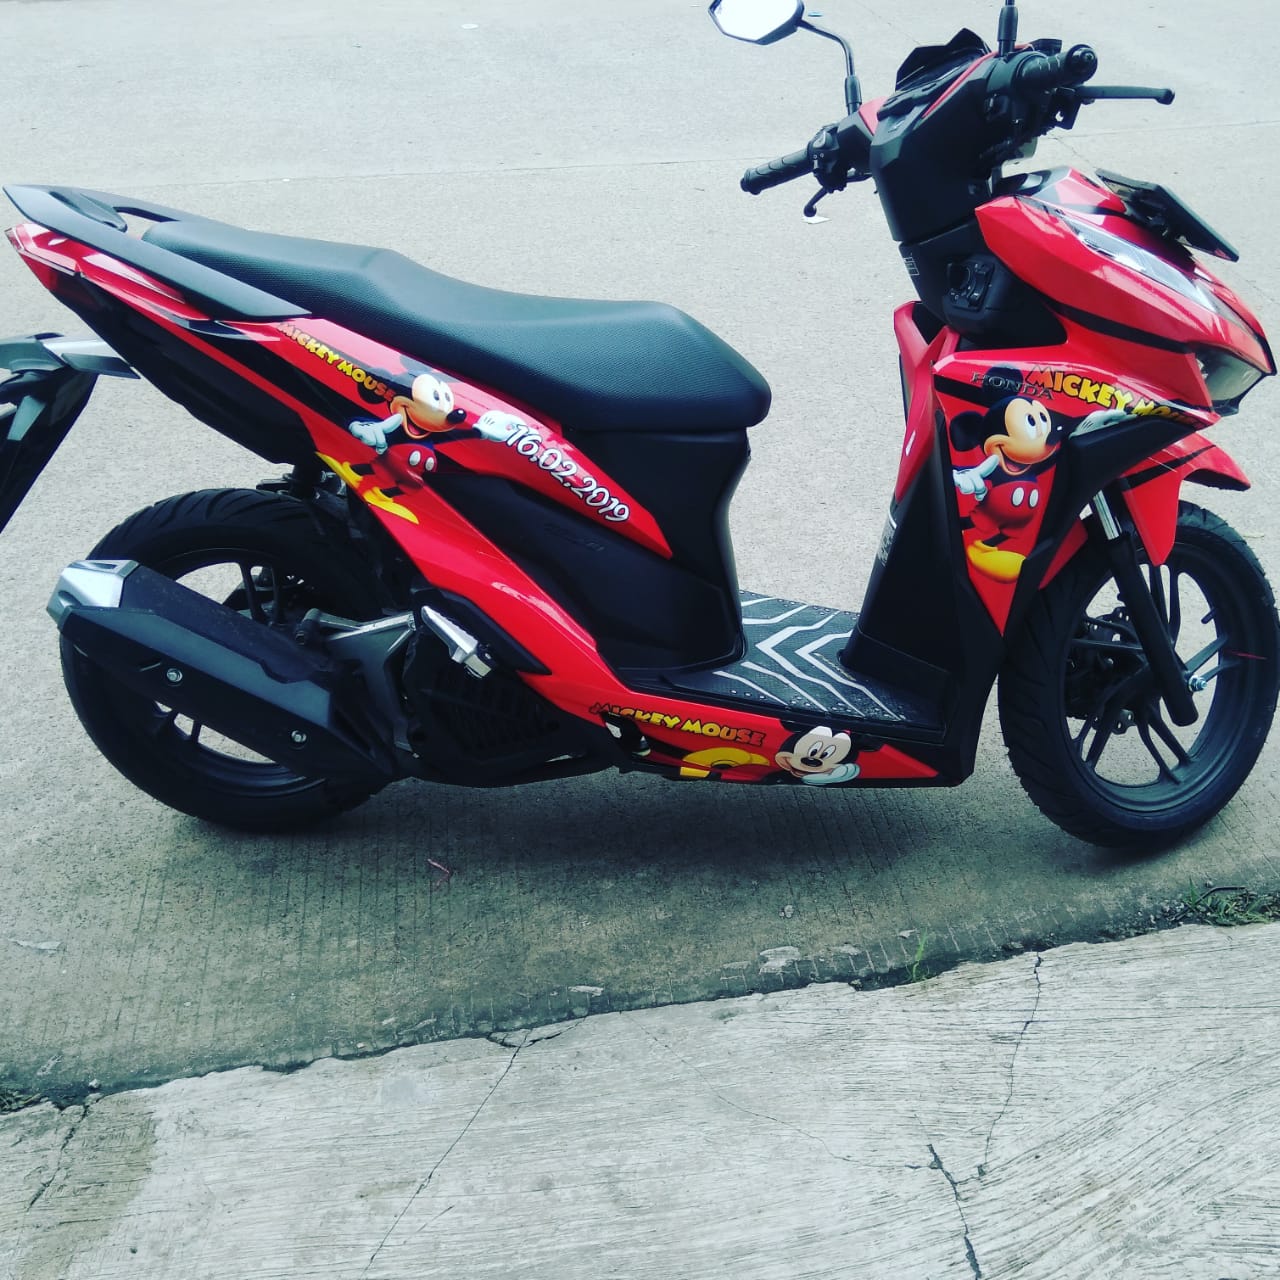 Decal Stiker Motor All New Vario Esp Mickey Mouse Red1 Grade B By Master Decal Lazada Indonesia